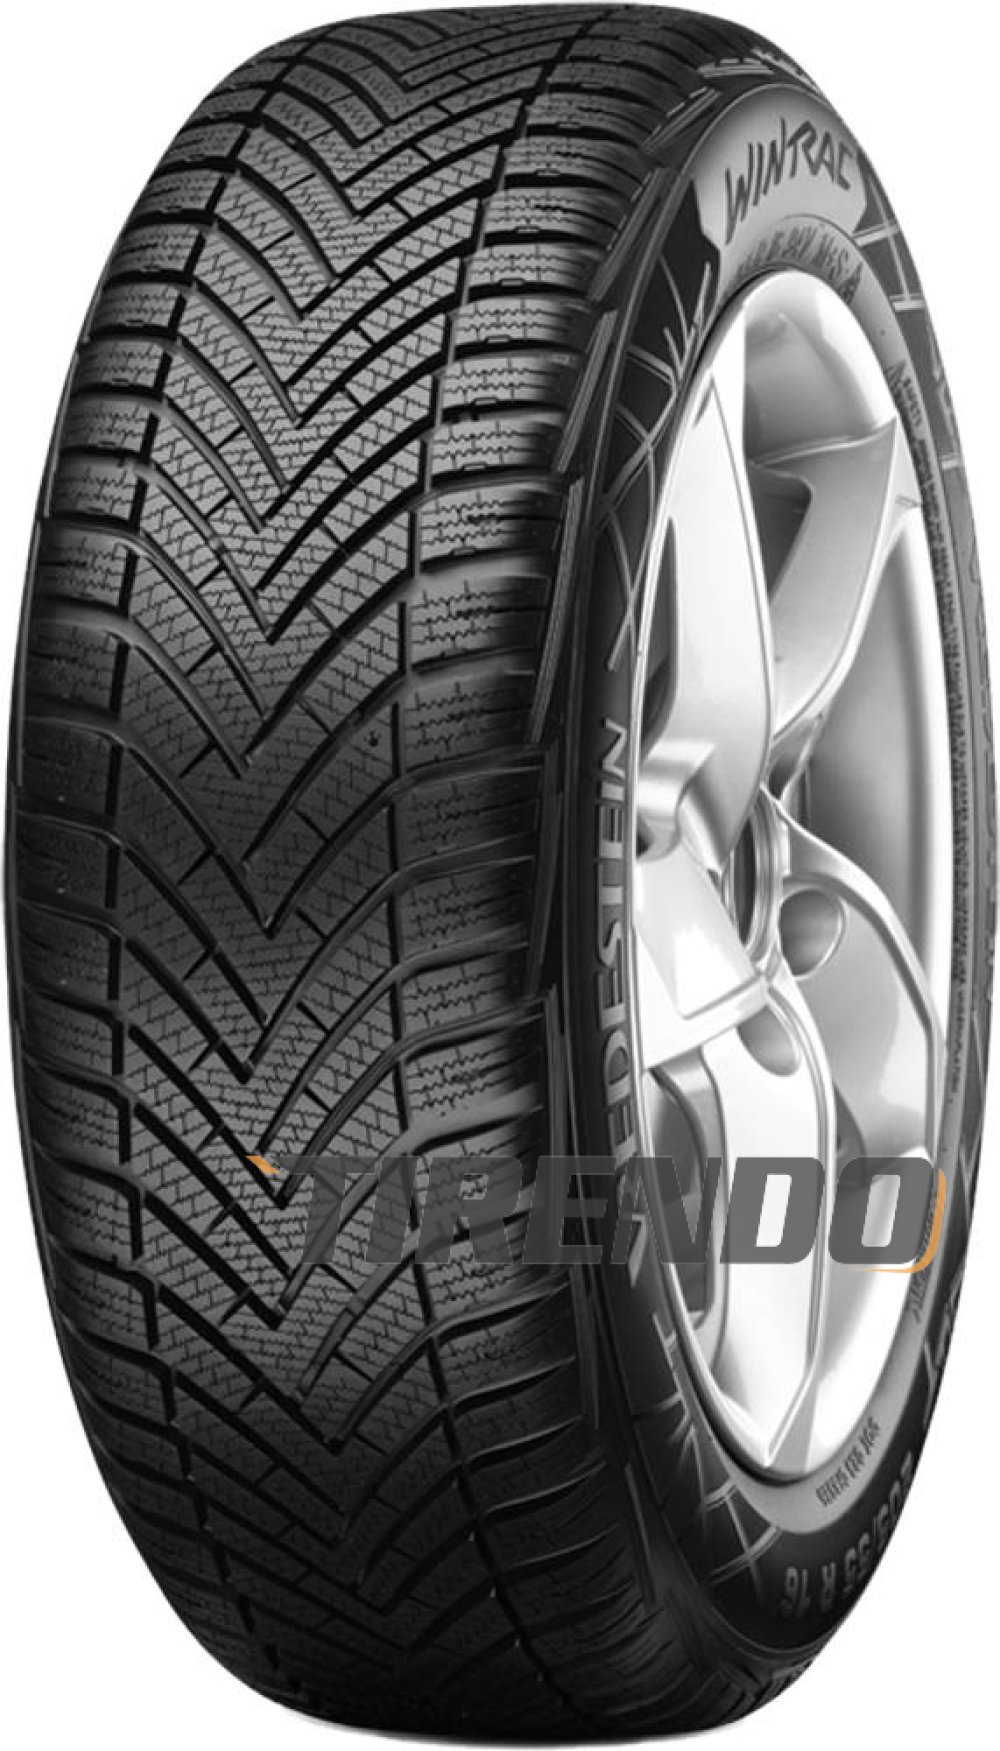 Image of Vredestein Wintrac ( 185/65 R15 88T )